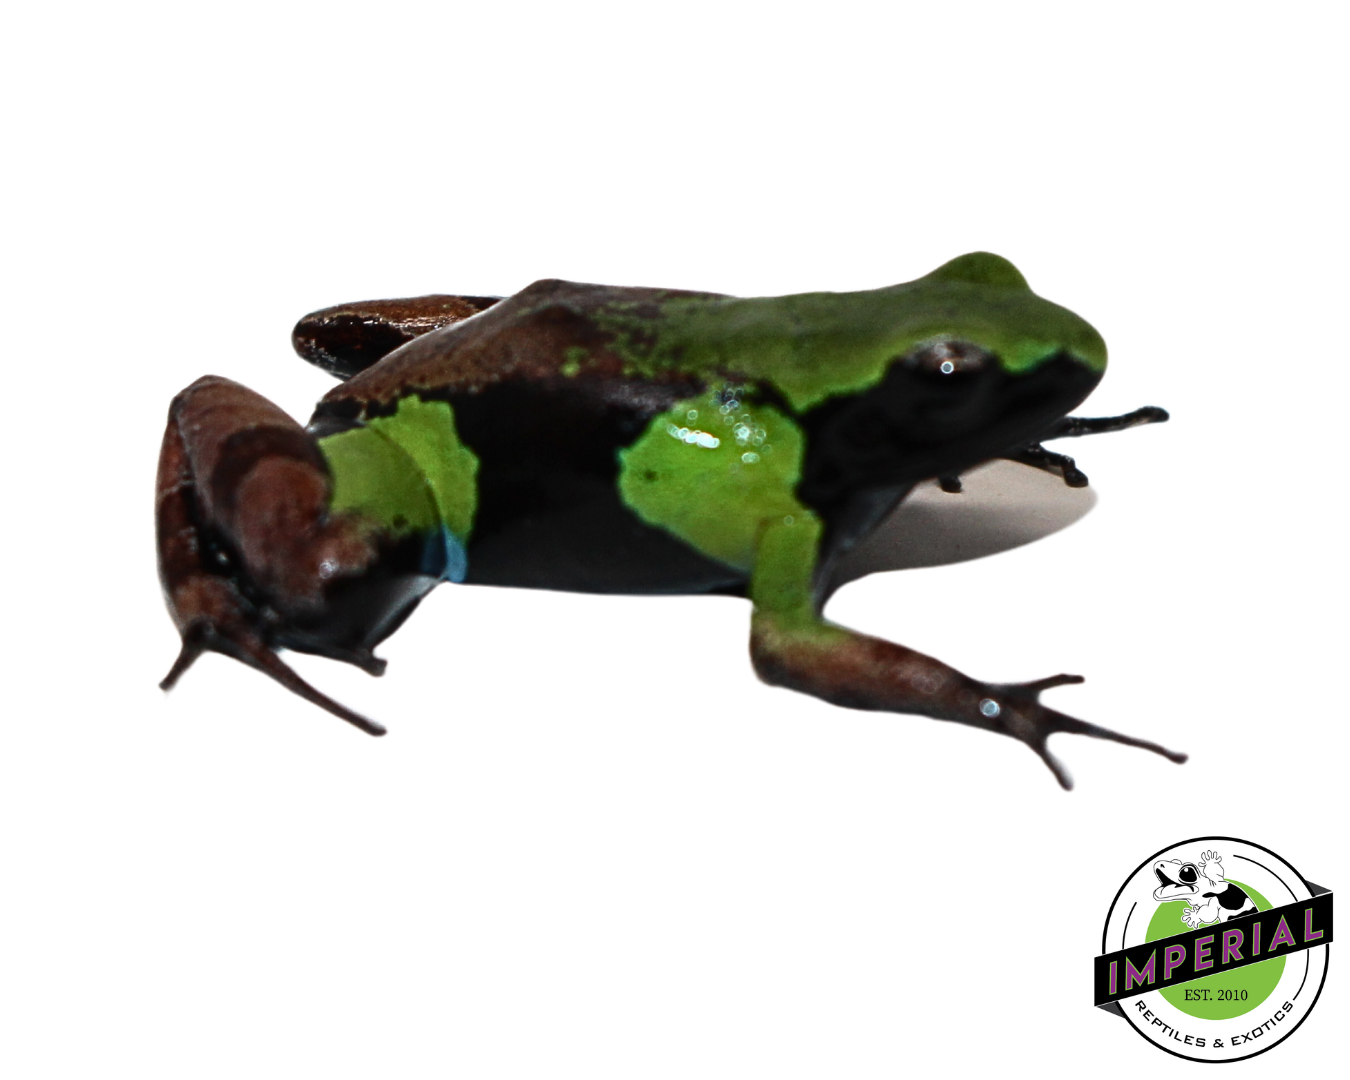 Green and Black Mantella for sale, reptiles for sale, buy reptiles online